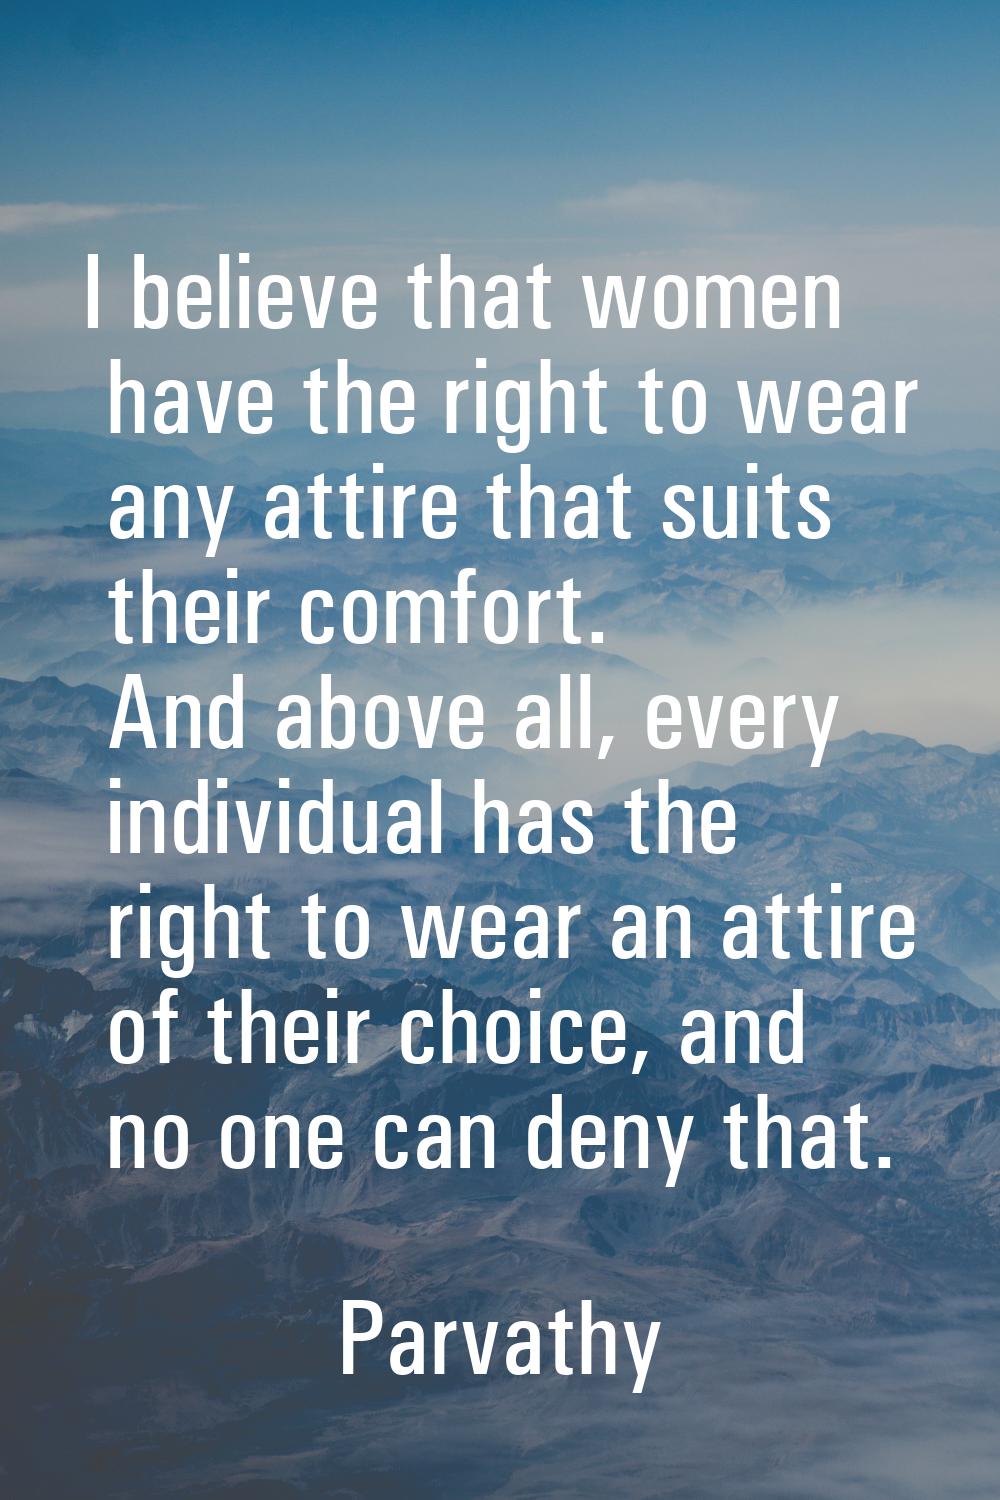 I believe that women have the right to wear any attire that suits their comfort. And above all, eve